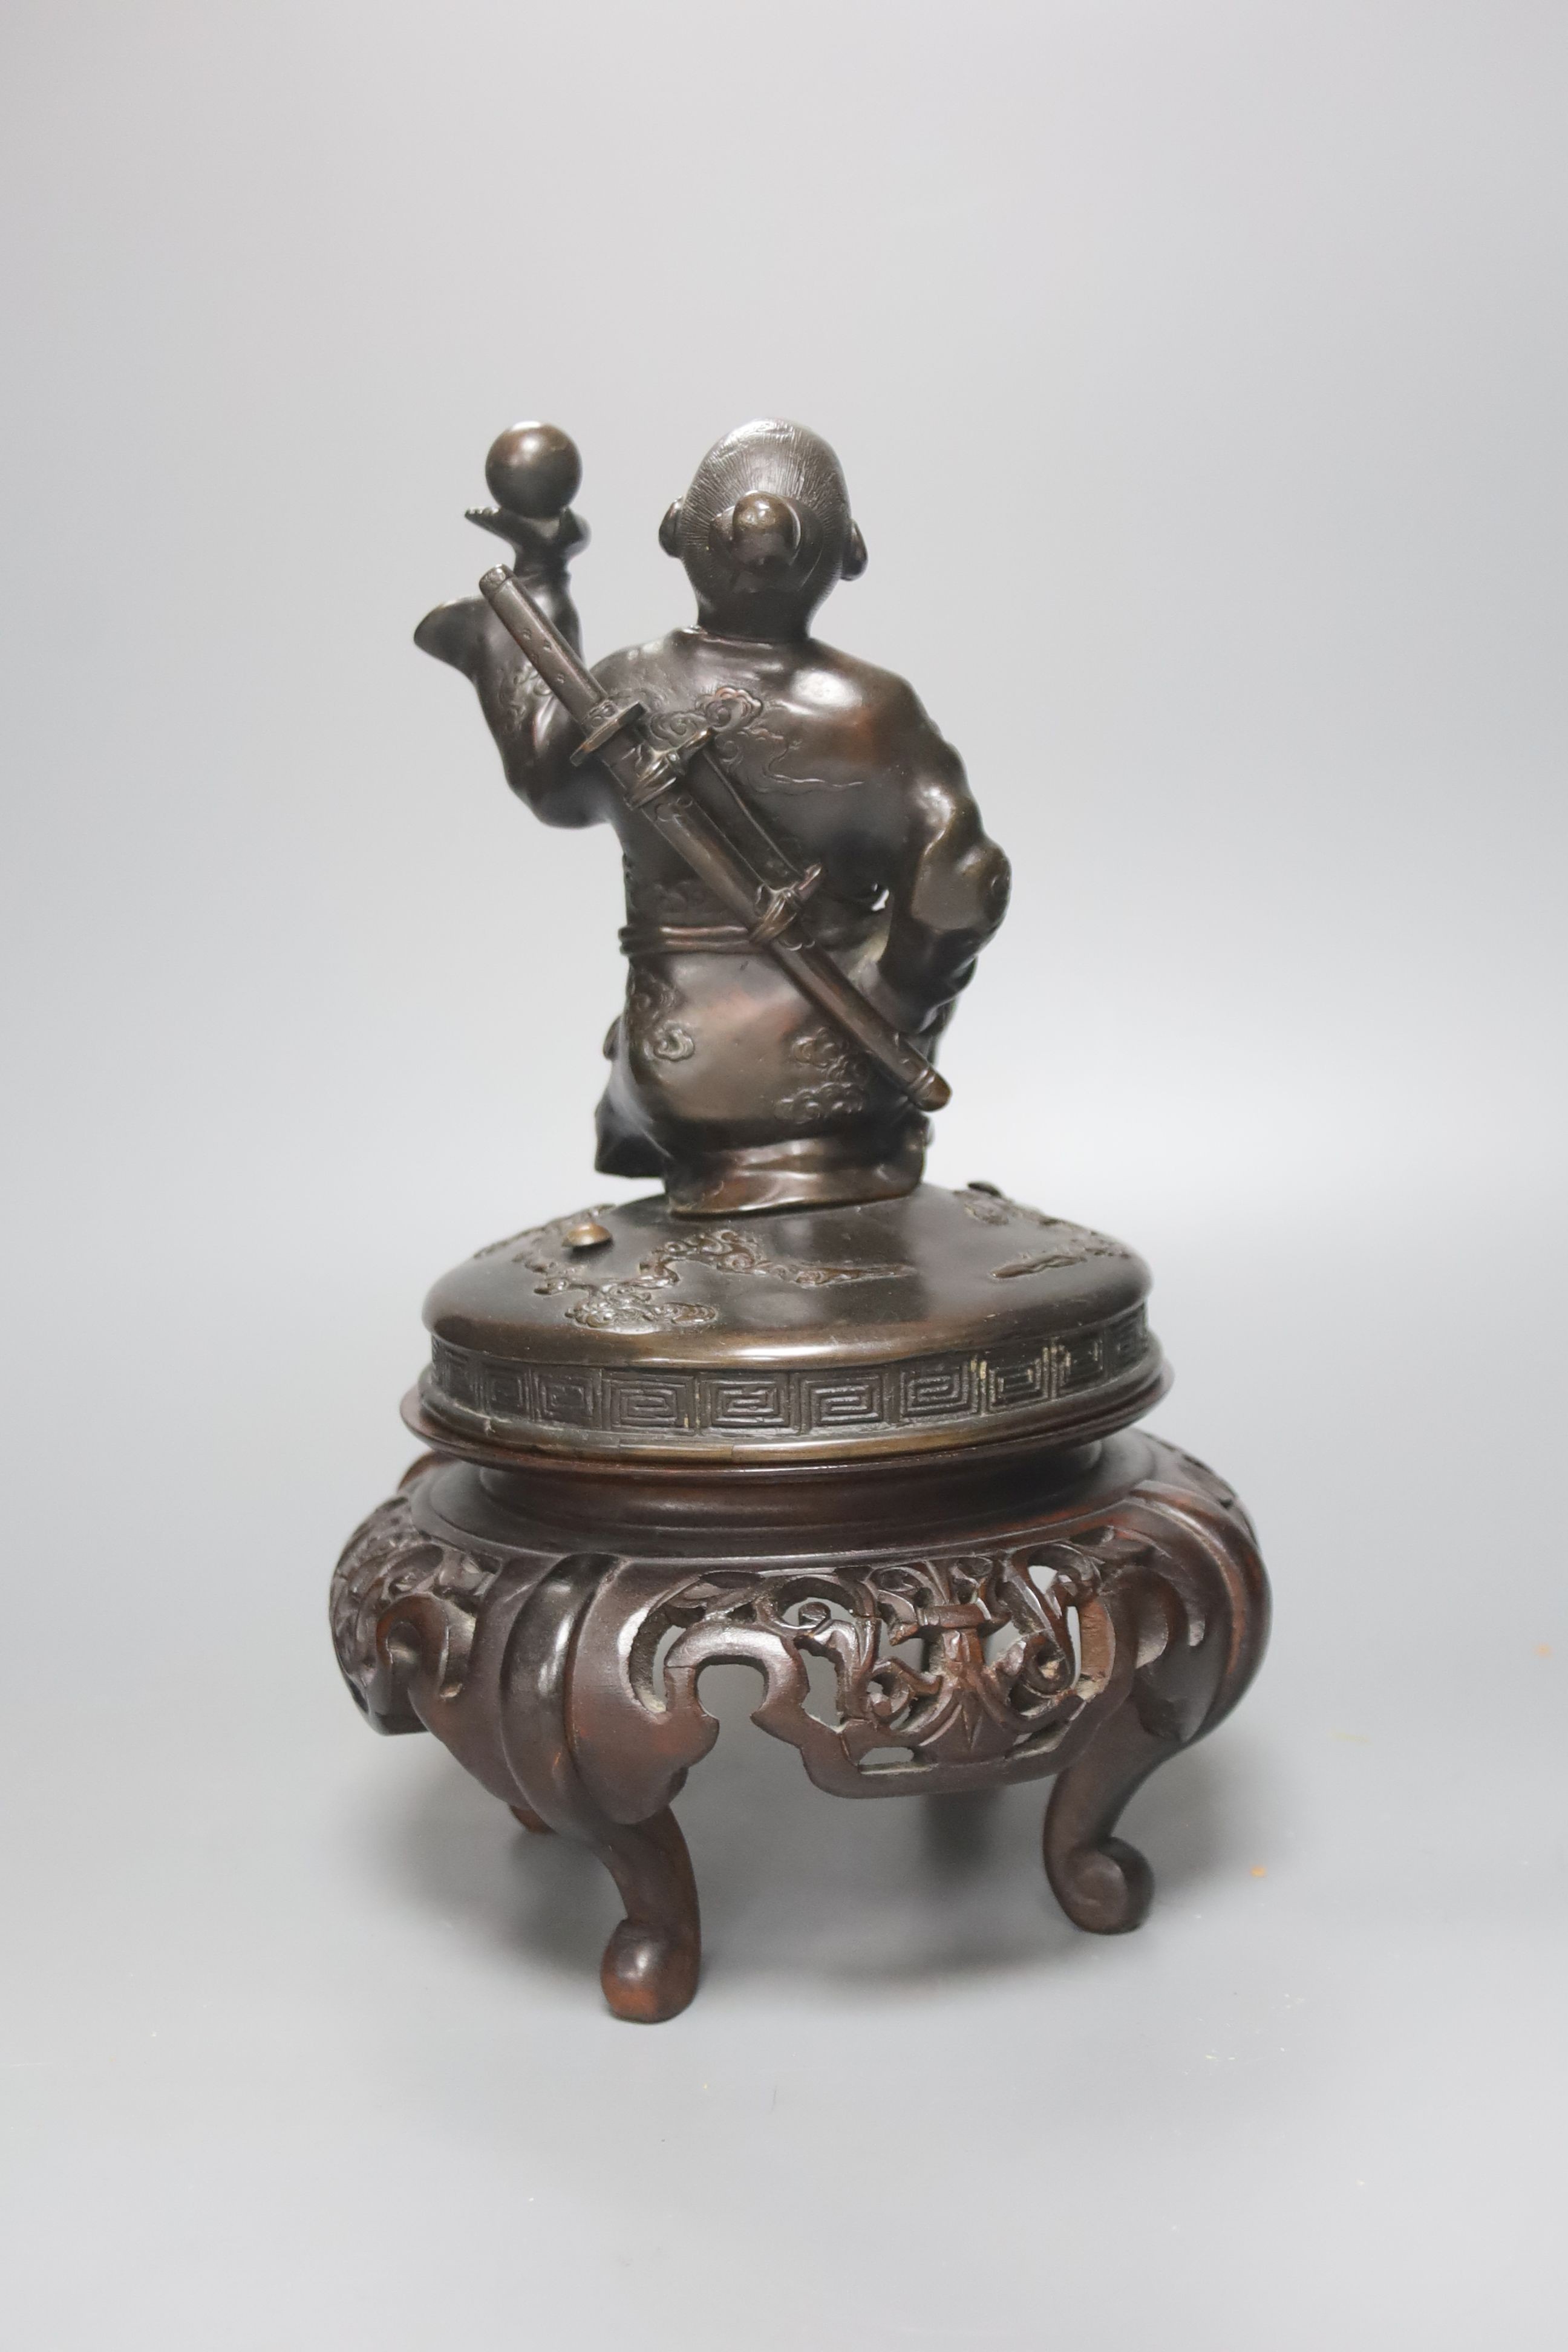 A Japanese bronze cover modelled as a samurai general, Meiji period, holding a fan and a ball, wood stand 28cm total height